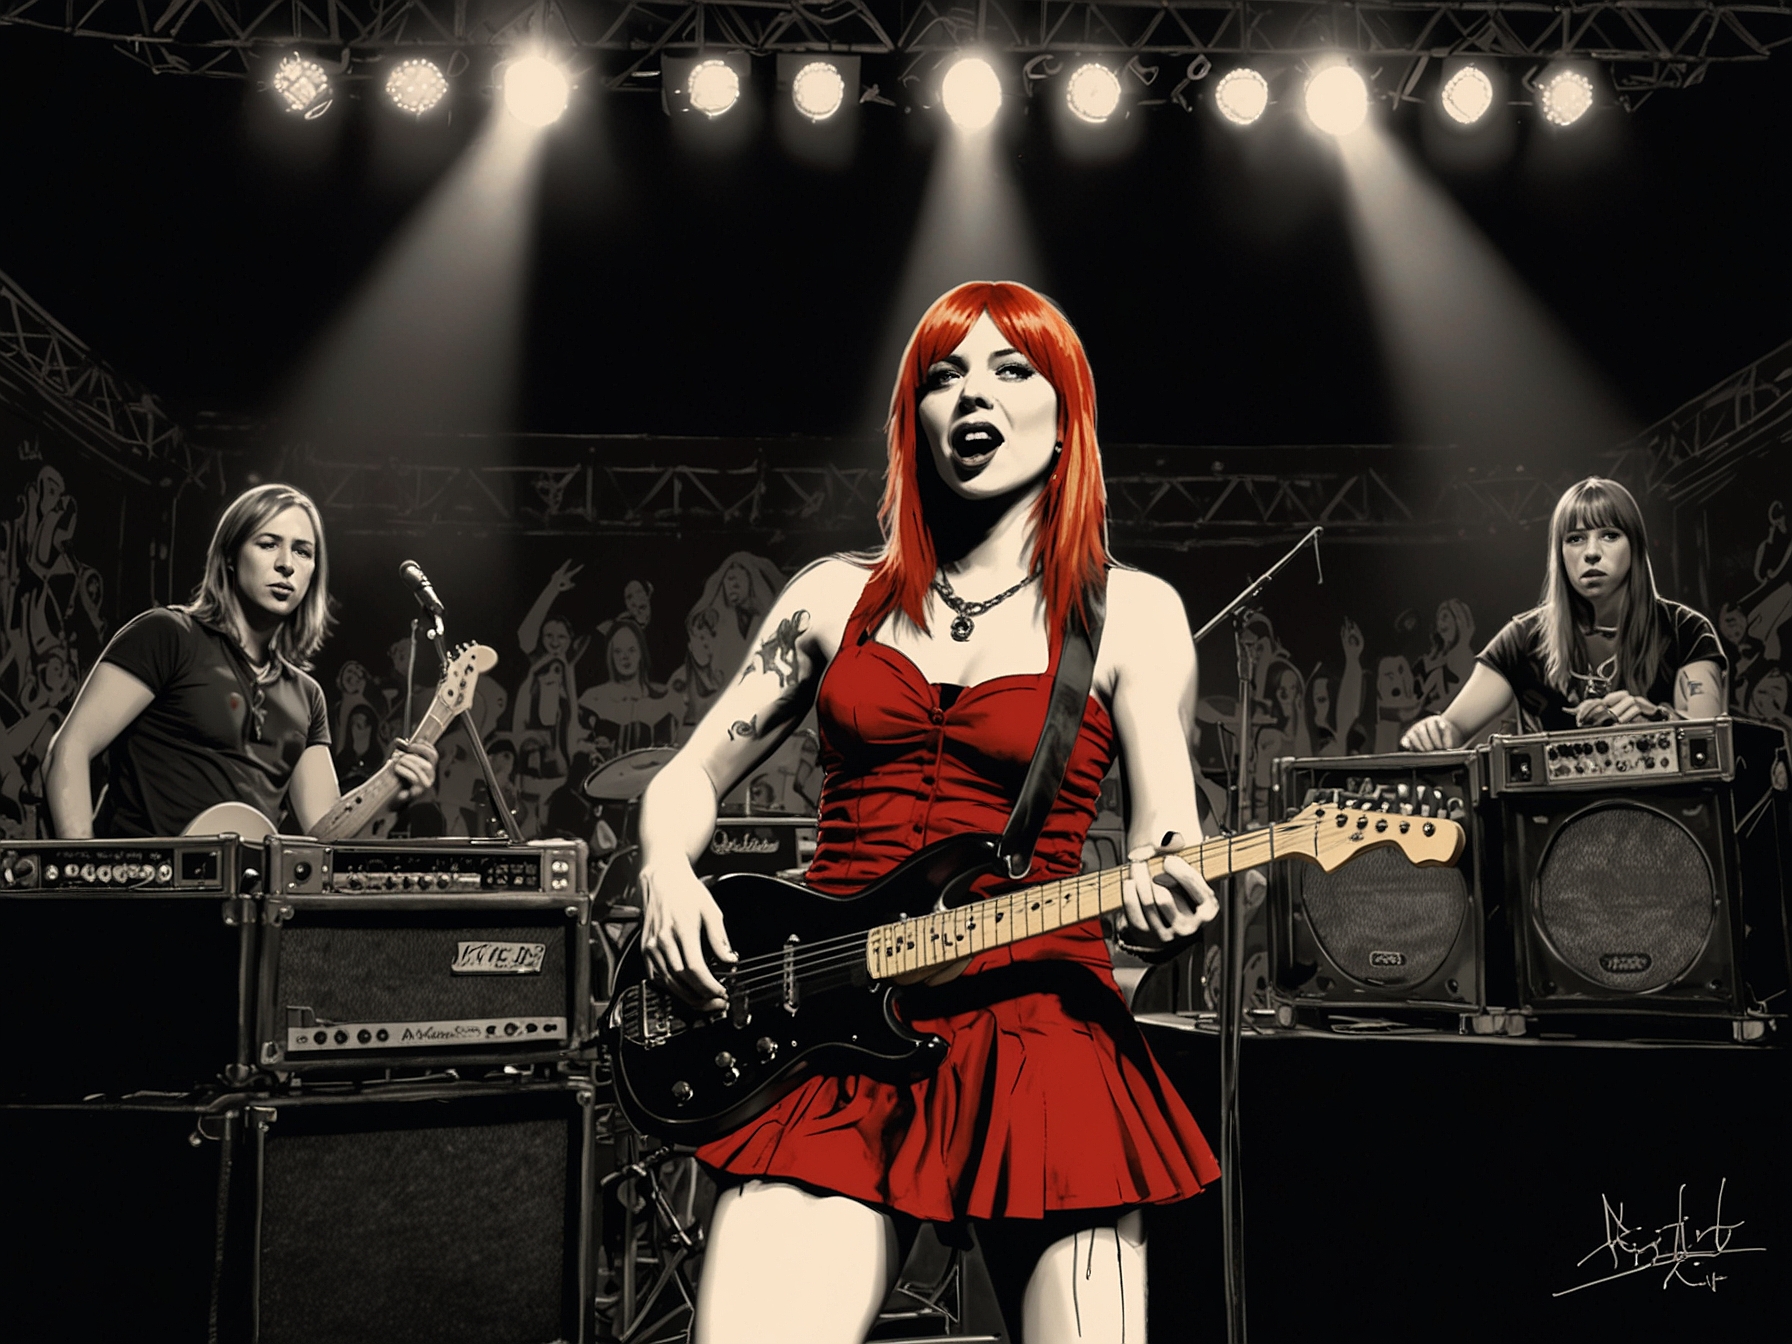 A vibrant live performance of Kittie, showcasing their energetic stage presence and the electric atmosphere of their concerts, with the band members passionately playing their instruments.